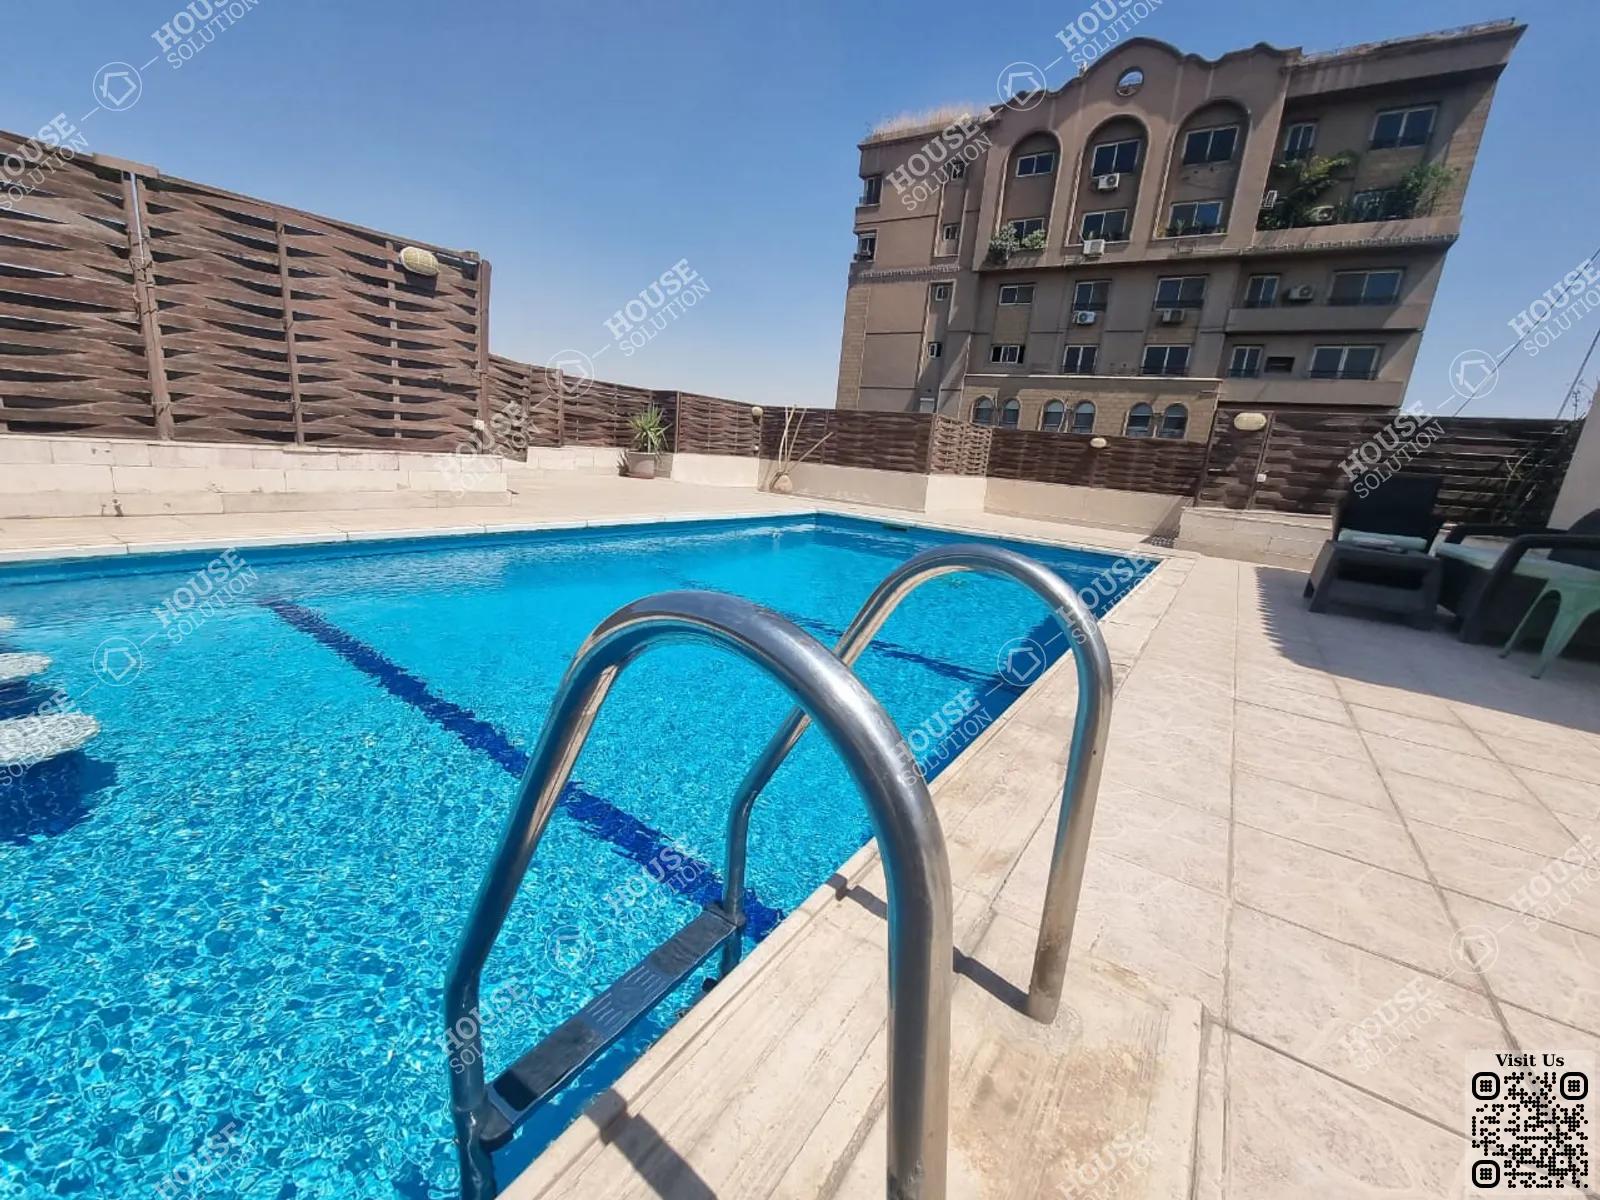 SHARED SWIMMING POOL  @ Apartments For Rent In Maadi Maadi Sarayat Area: 120 m² consists of 2 Bedrooms 2 Bathrooms Modern furnished 5 stars #4392-2